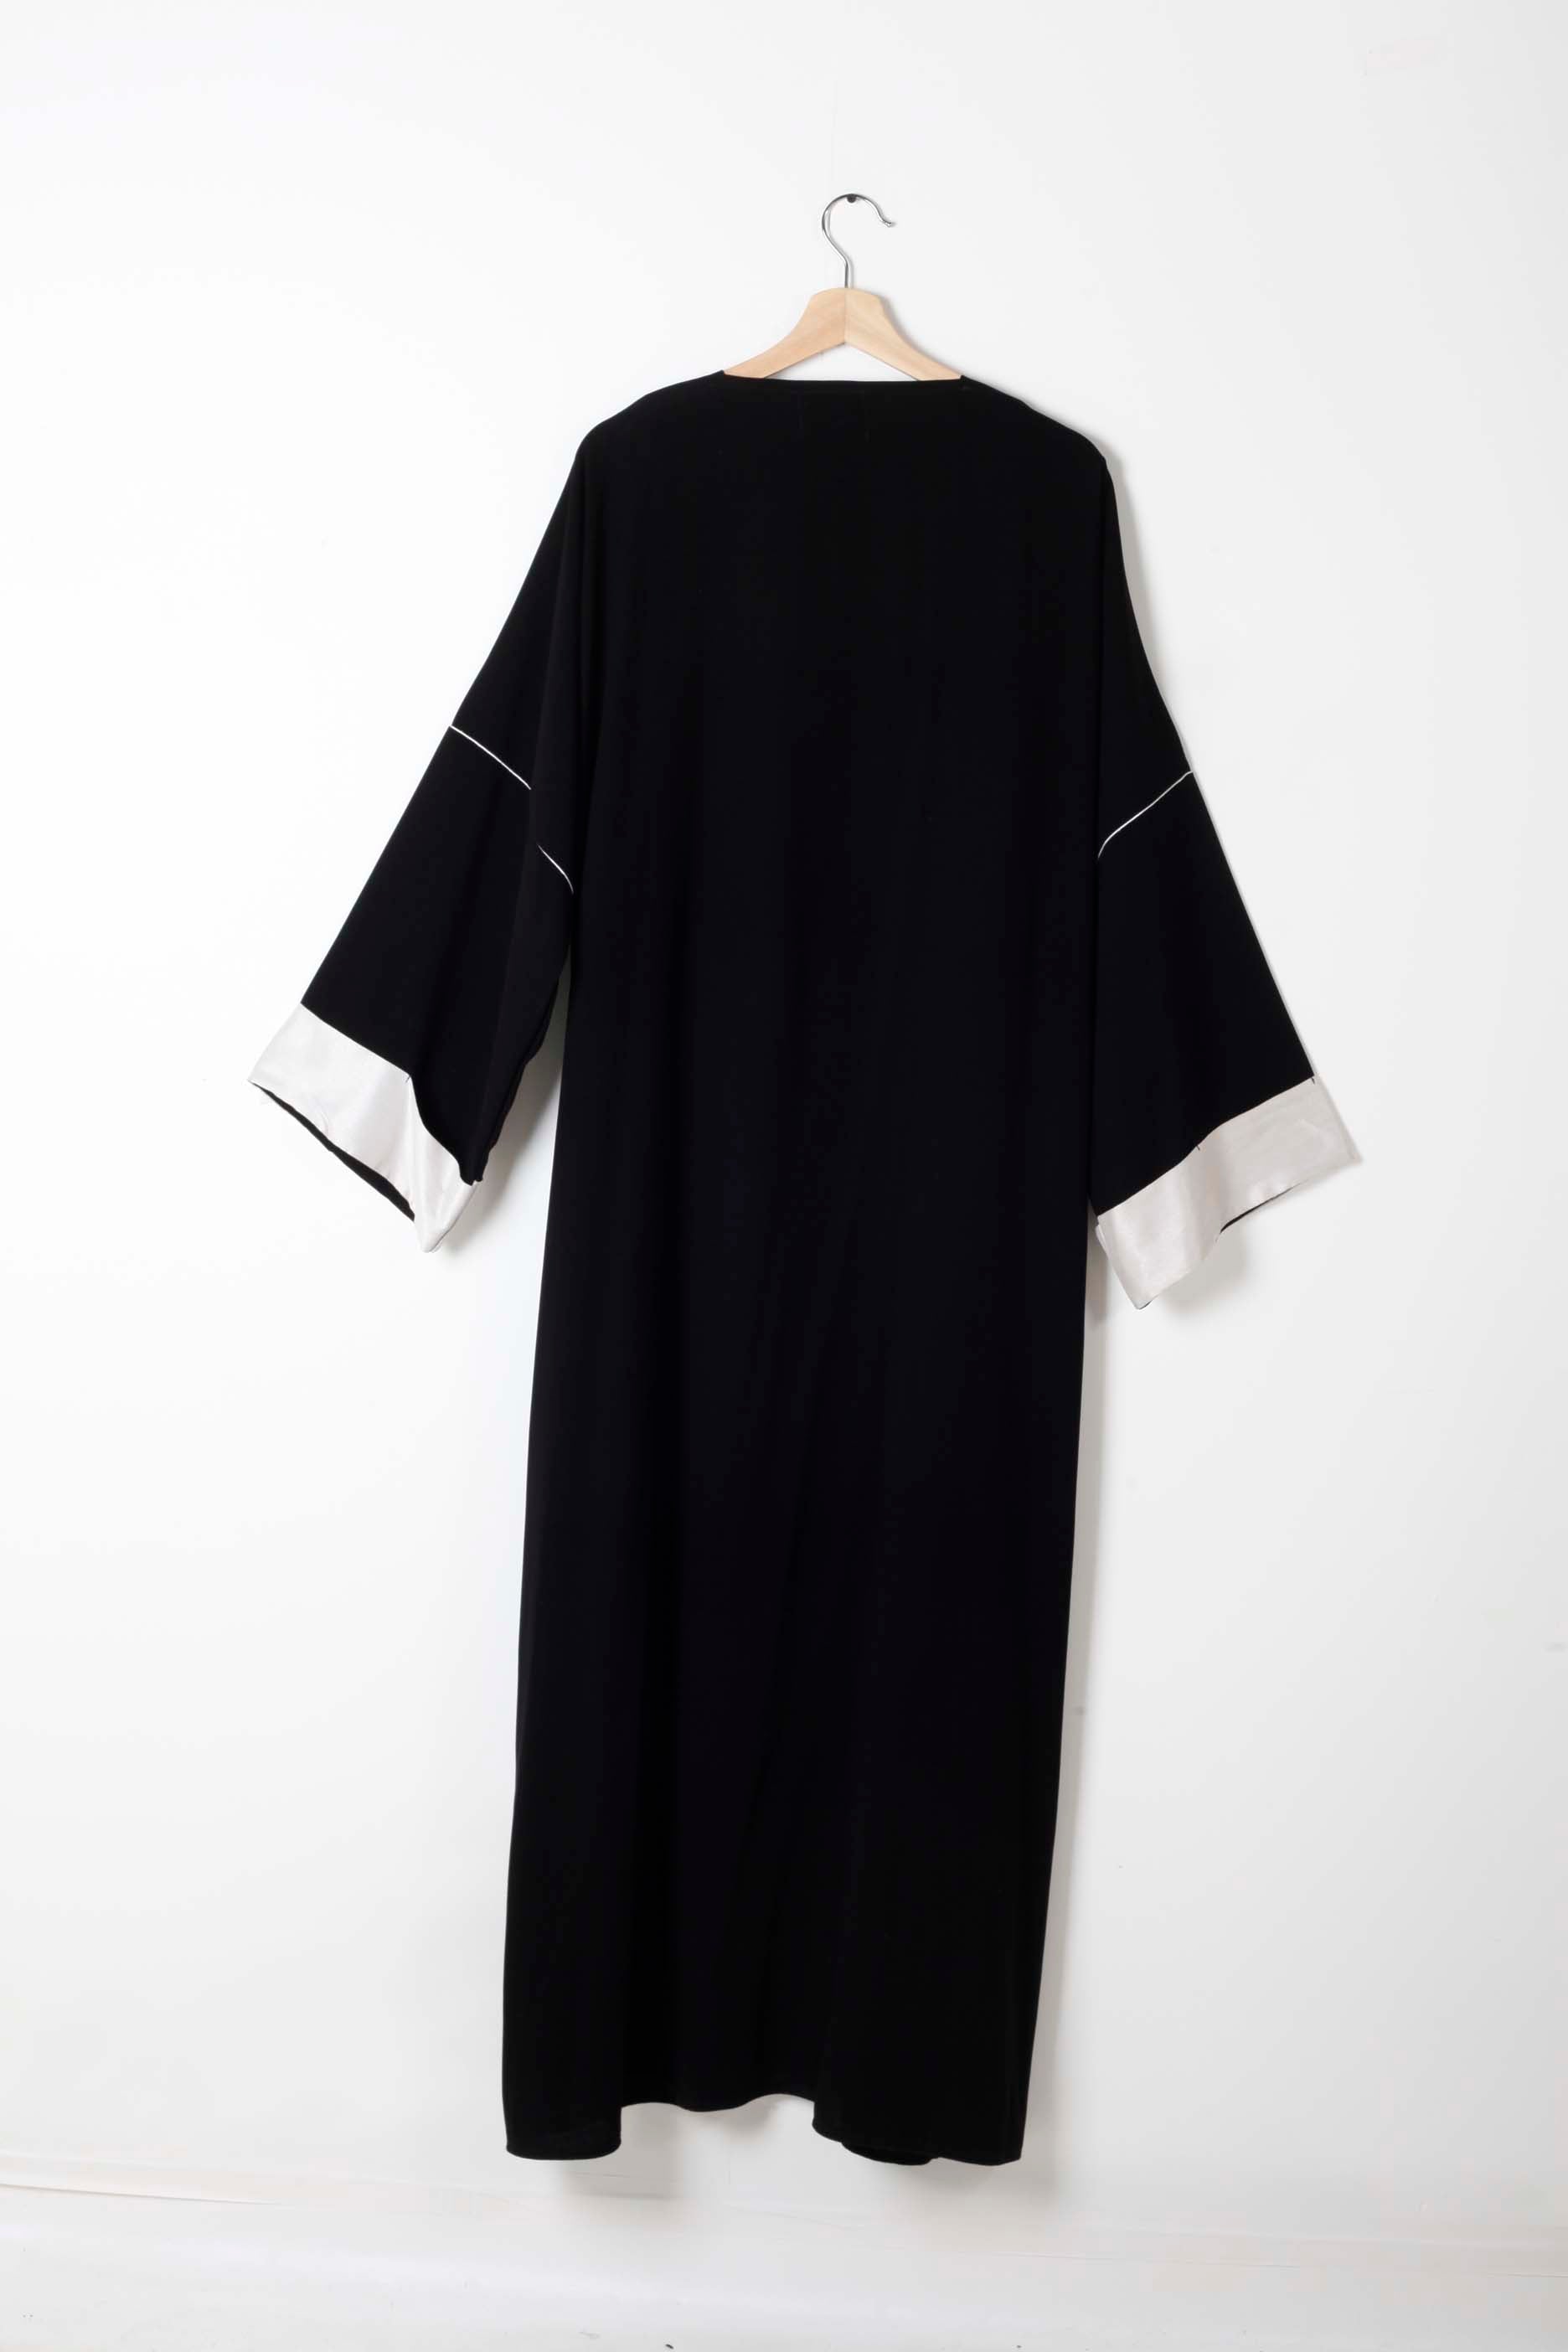 Black Abaya with White Cuffs and Silver Beading